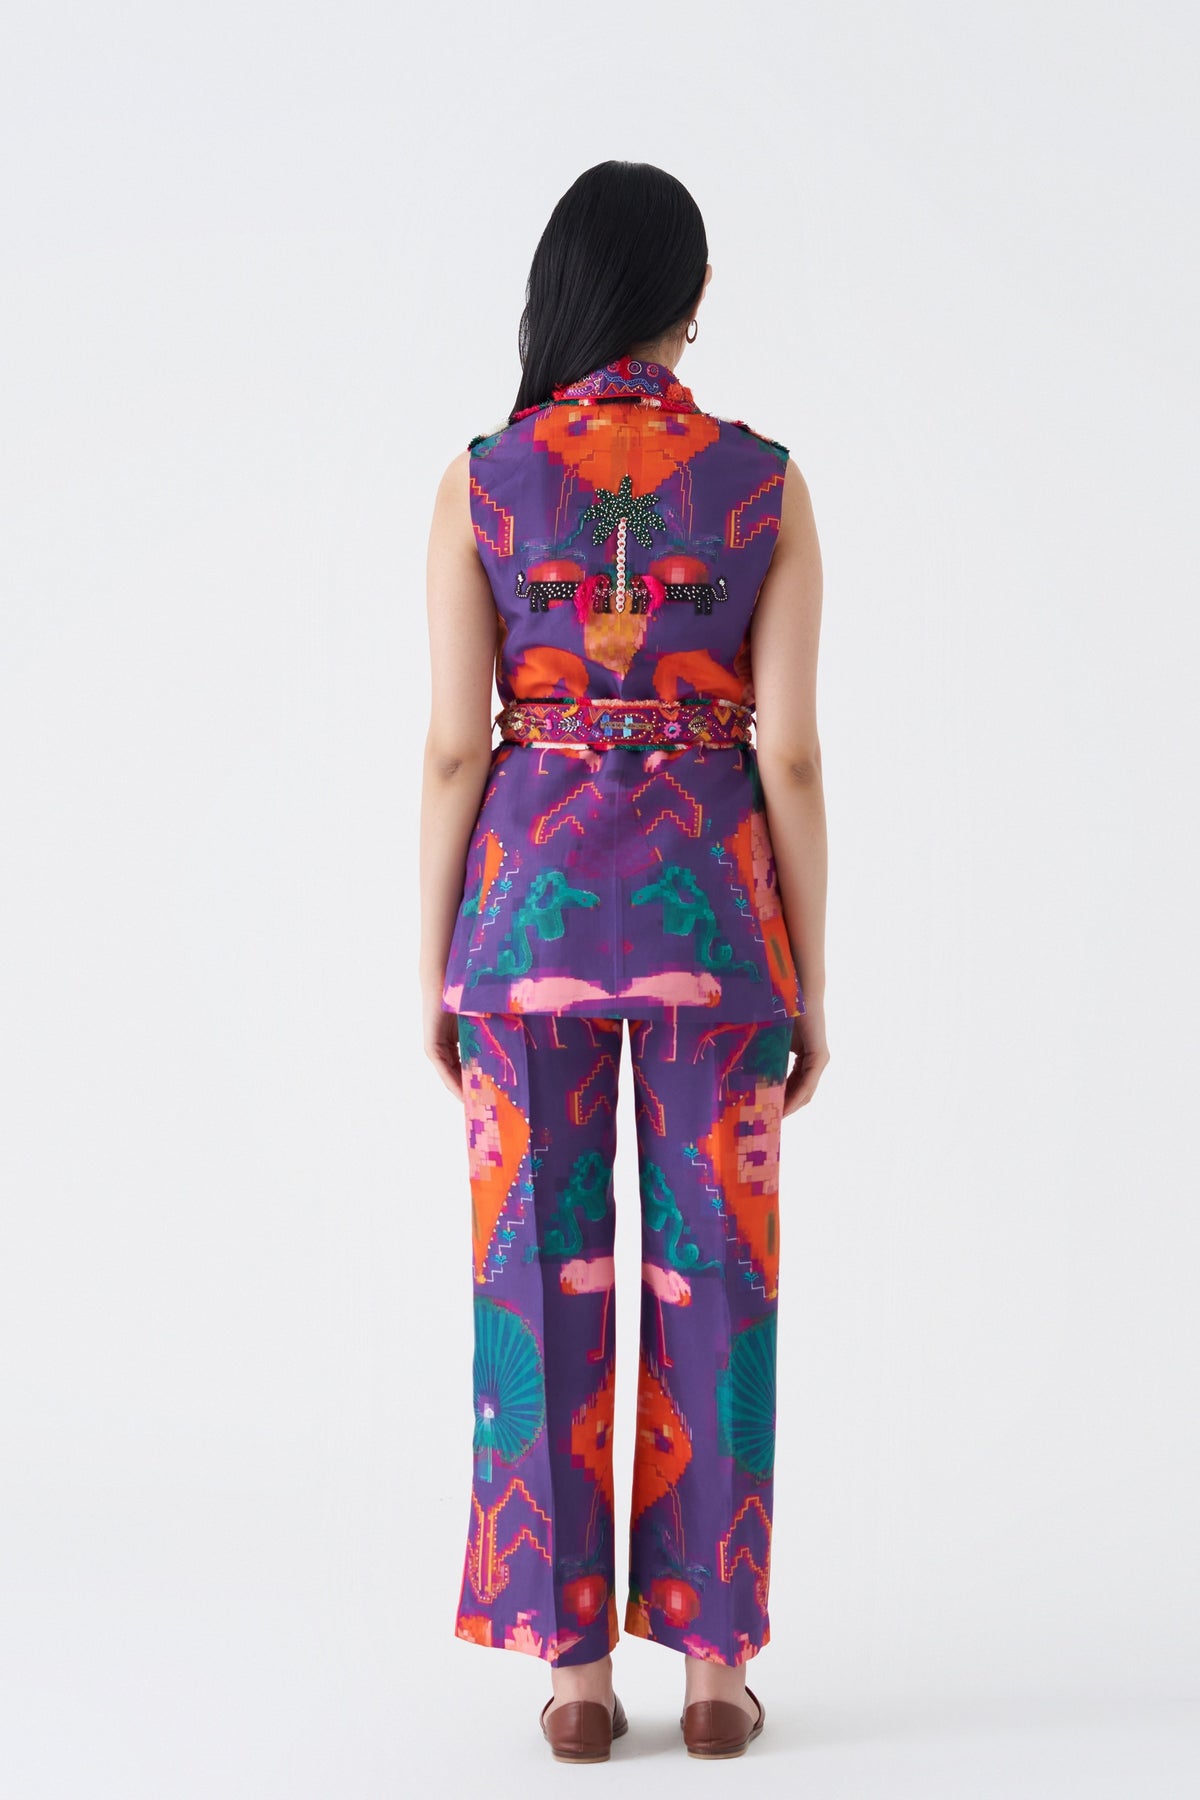 Print and Embroidered Oaxaca Morado Pantsuit